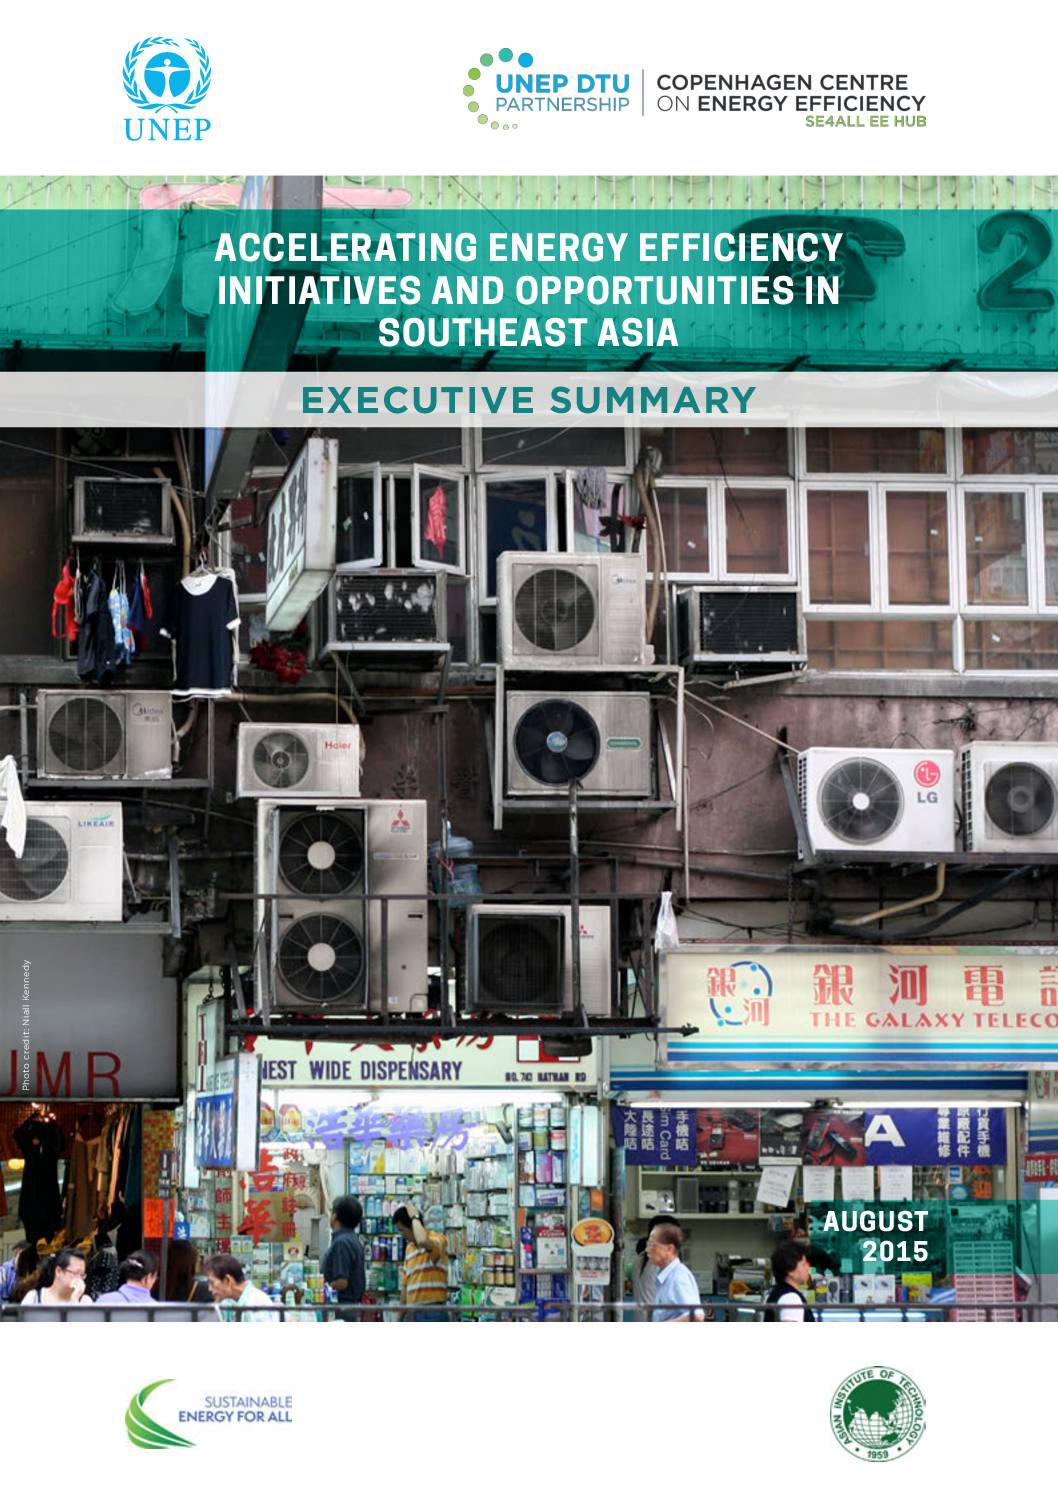 Executive Summary – Accelerating Energy Efficiency Initiatives in Southeast Asia